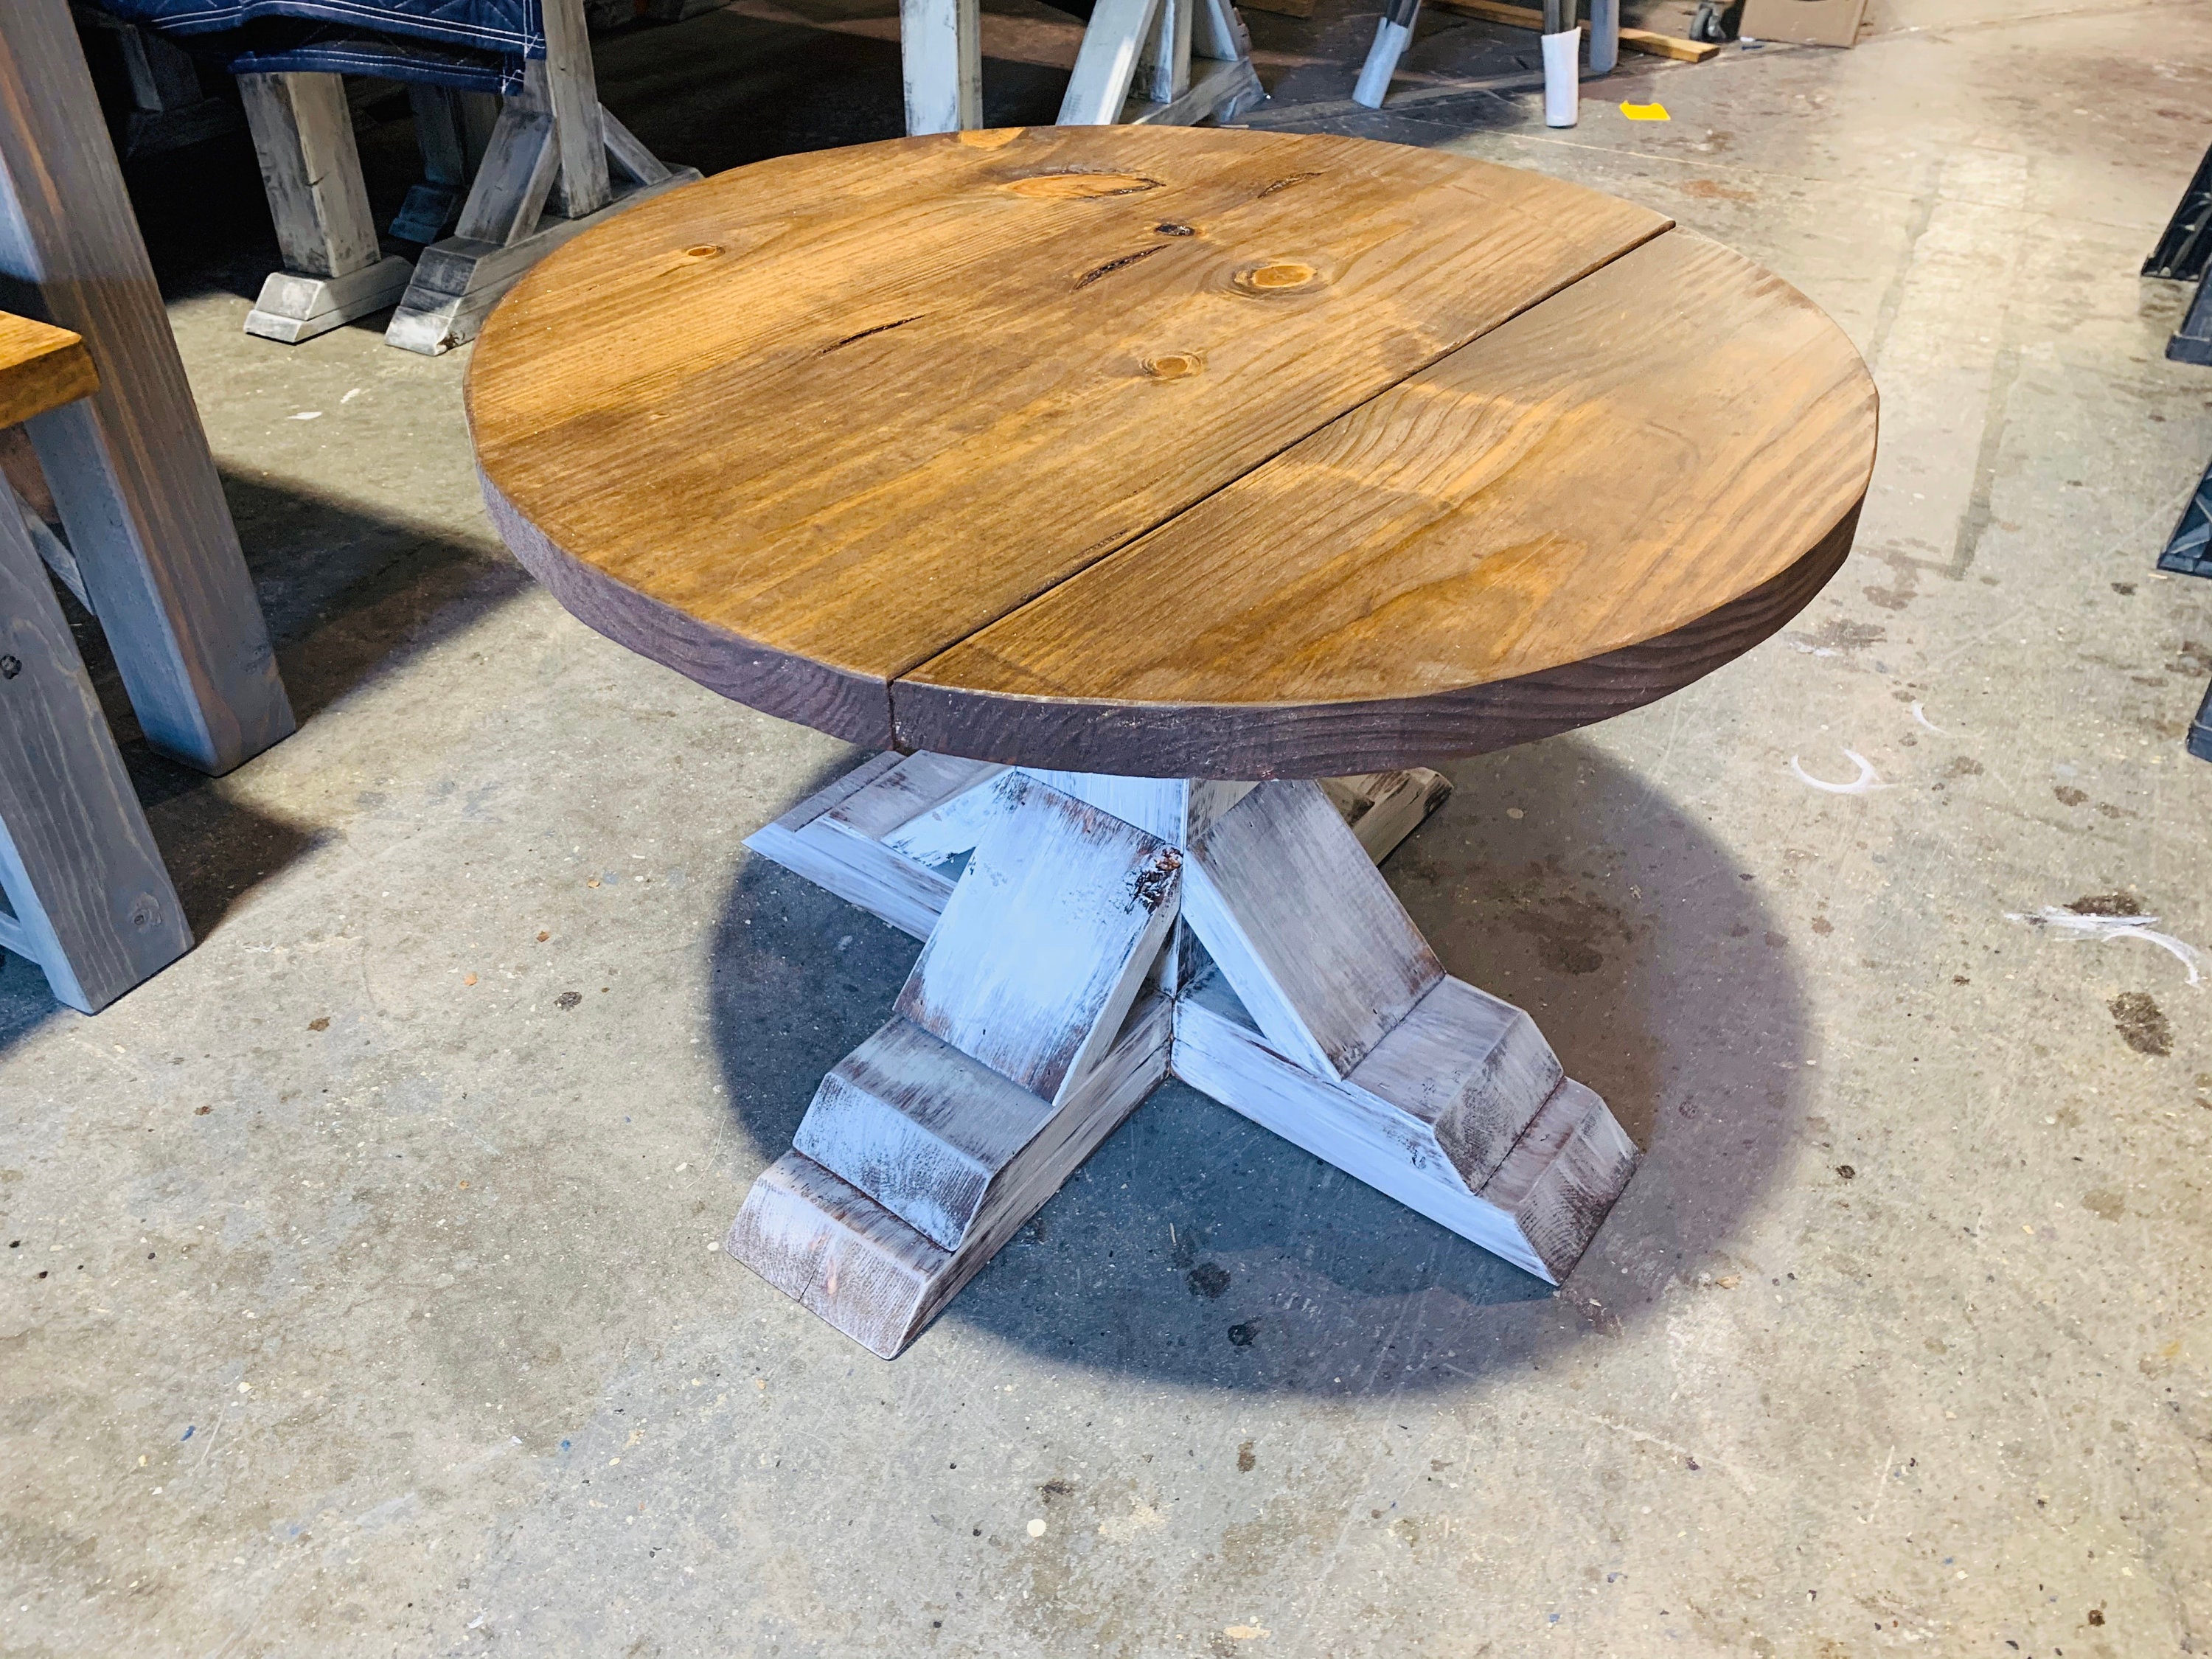 farmhouse living room round coffee table